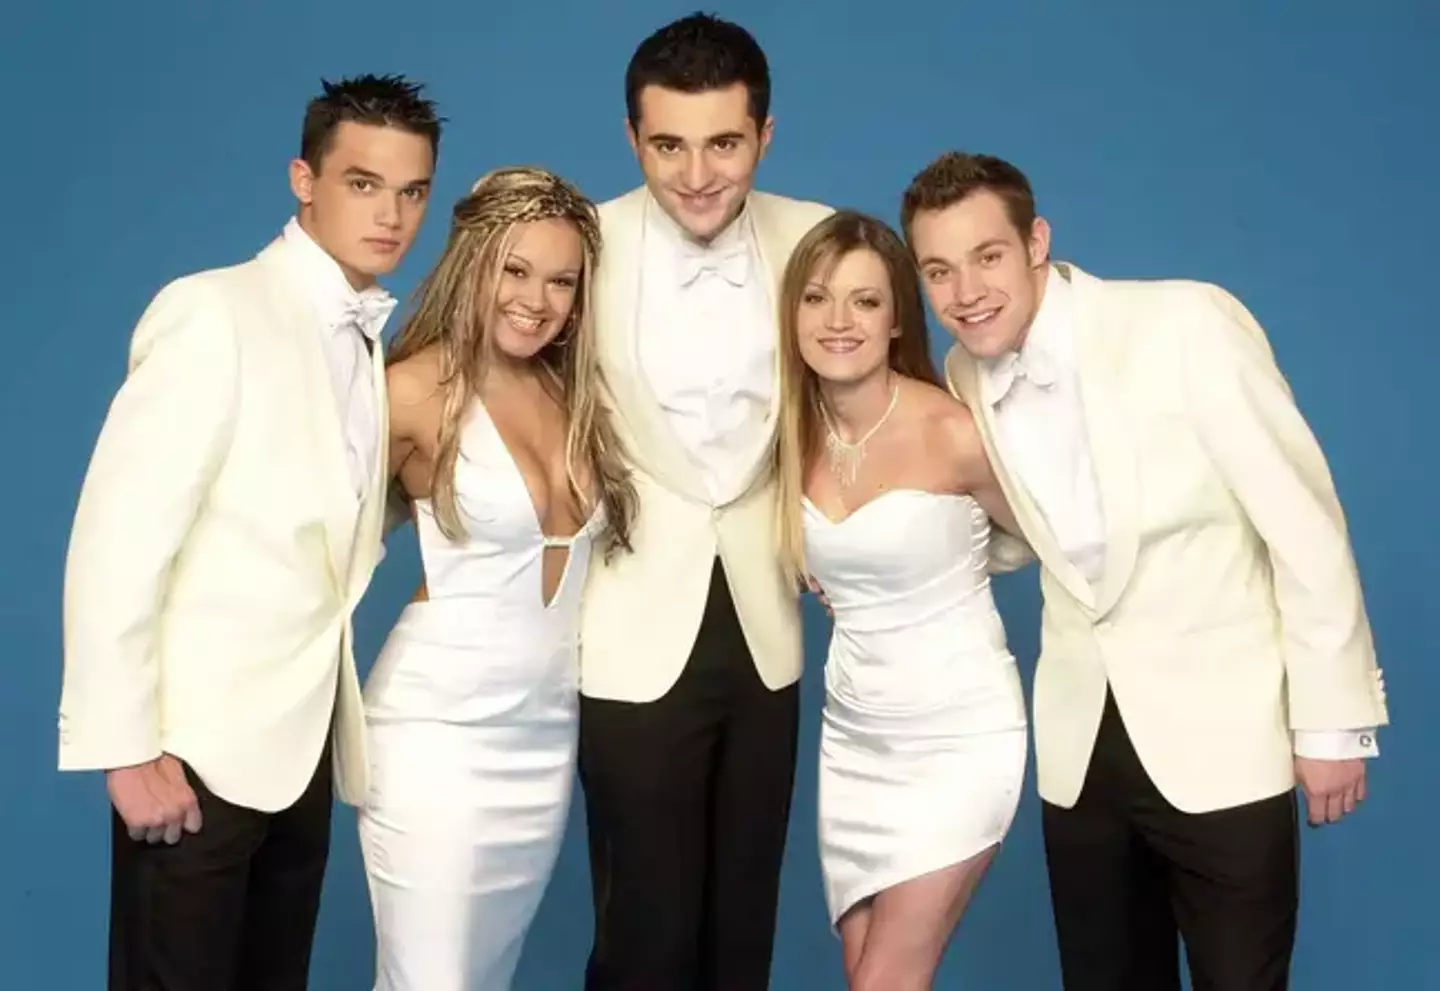 Darius (centre) rose to fame alongside fellow Pop Idol contestants Gareth Gates, Zoe Birkett, Hayley Evetts and Will Young.